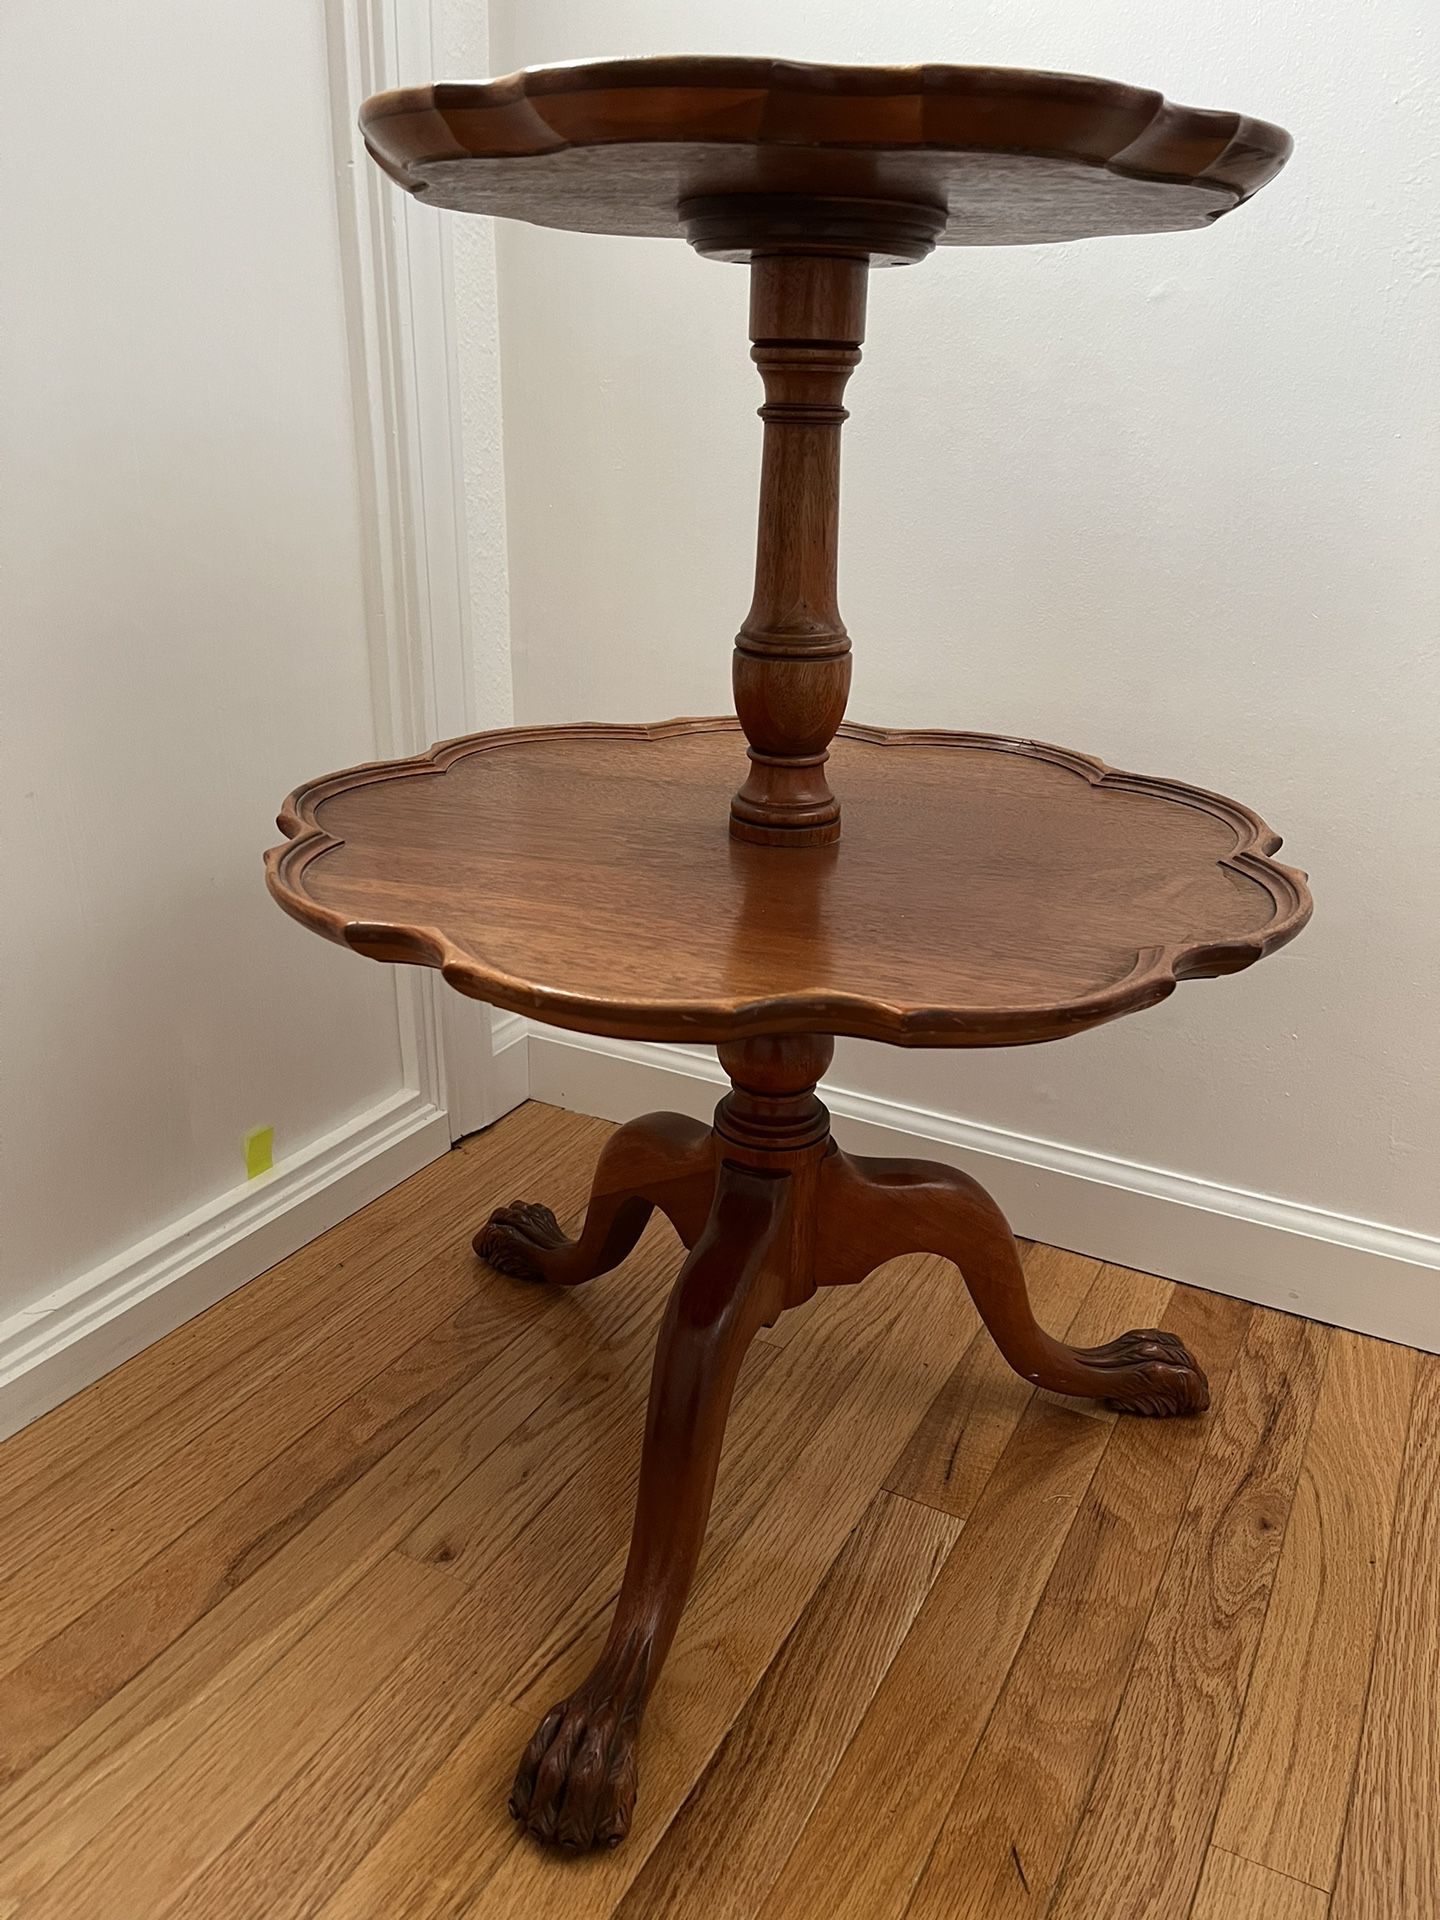 Mahogany 2-Tier Pie Crust Table From Mid-1900s